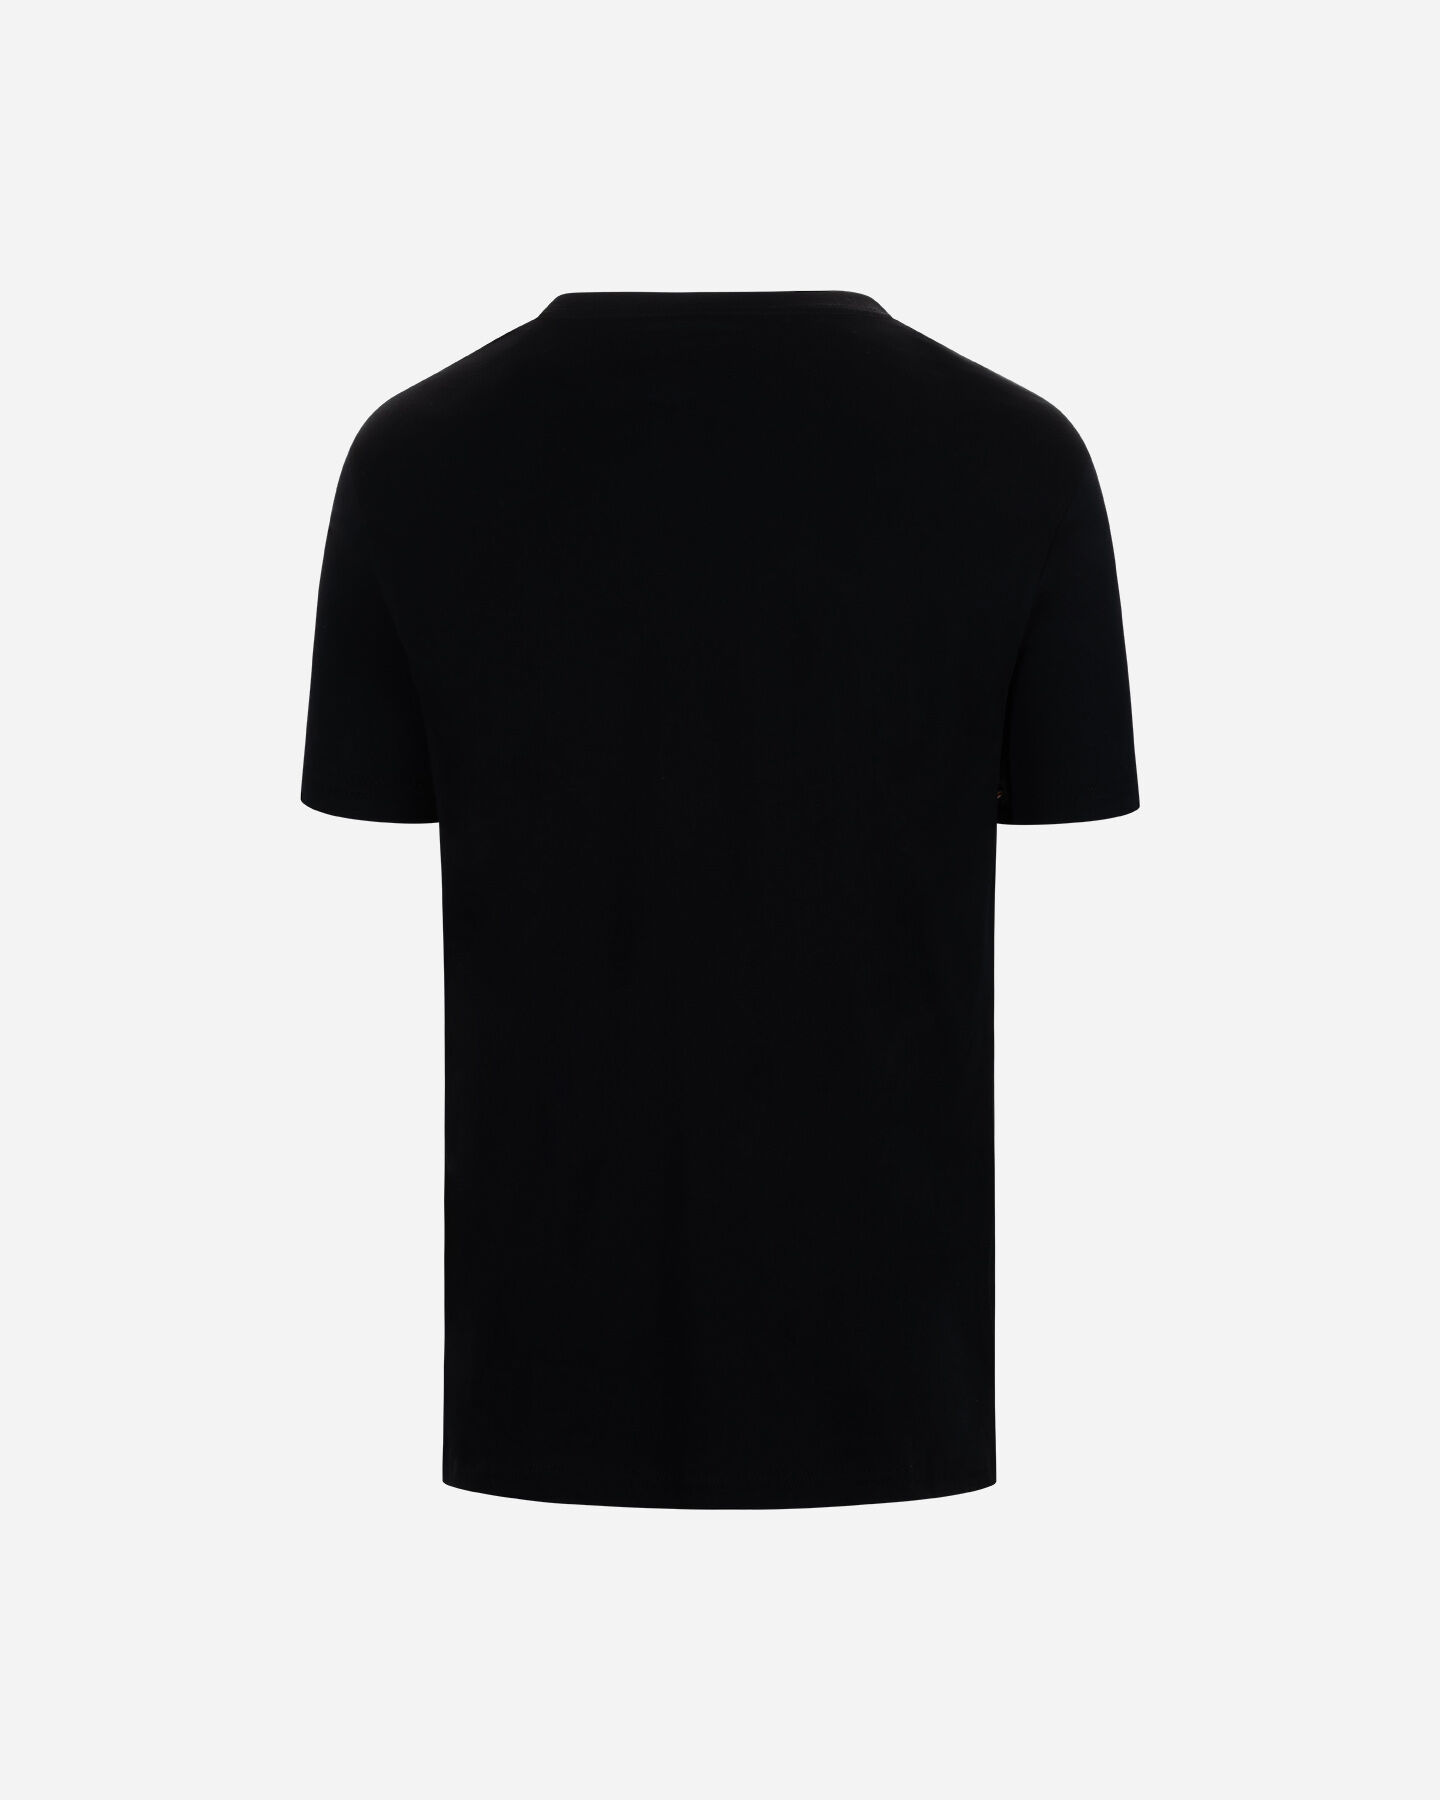  T-Shirt VANS TRANSFIXED M S5555692|BLK|S scatto 1